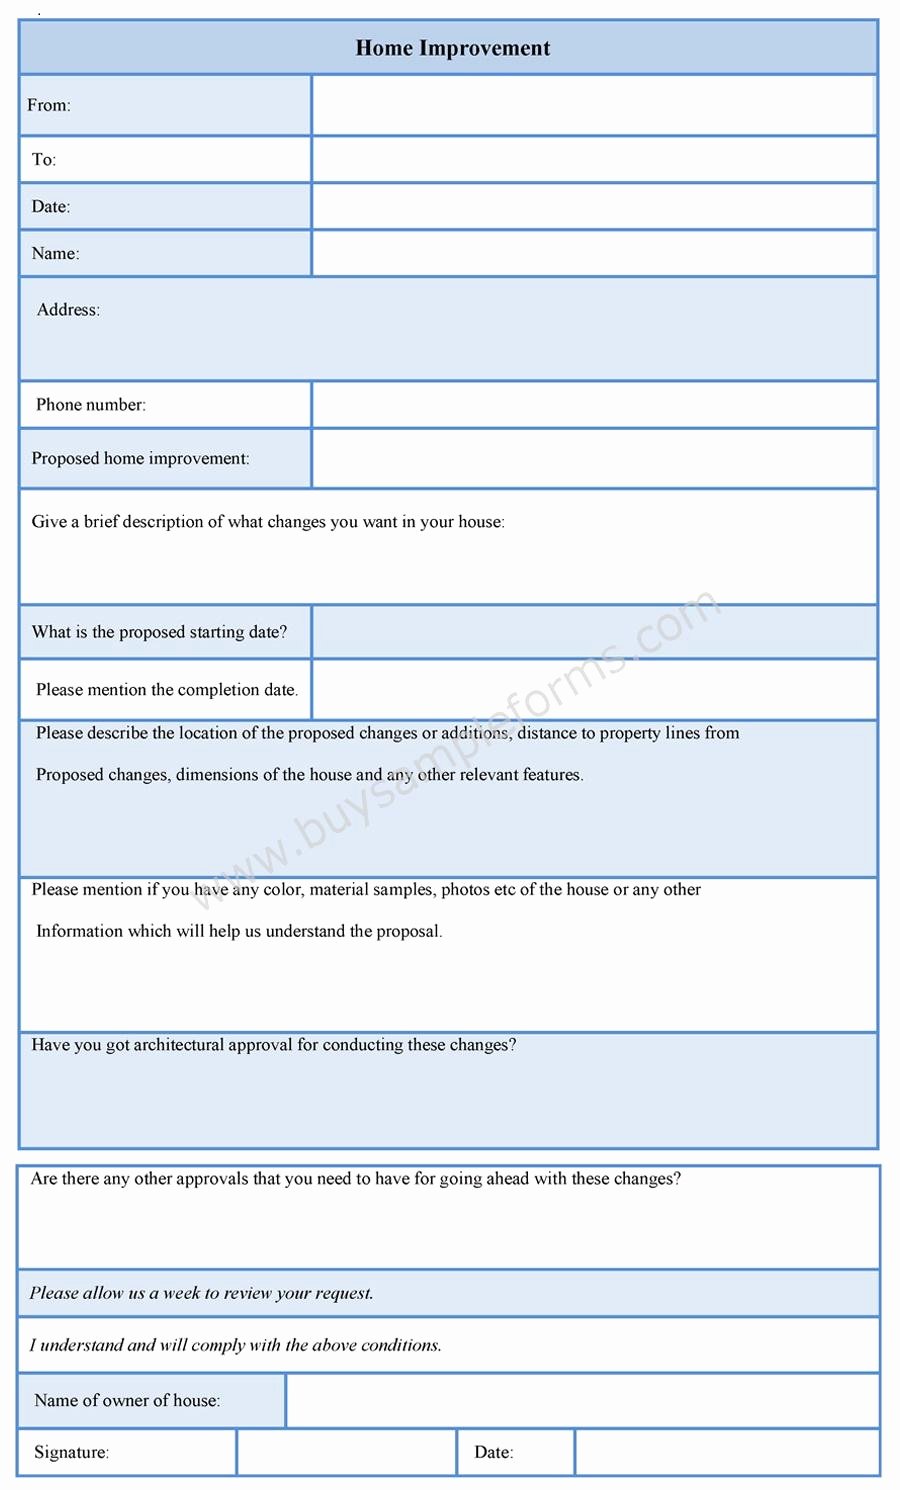 Home Improvement Contract Template Luxury Home Improvement form